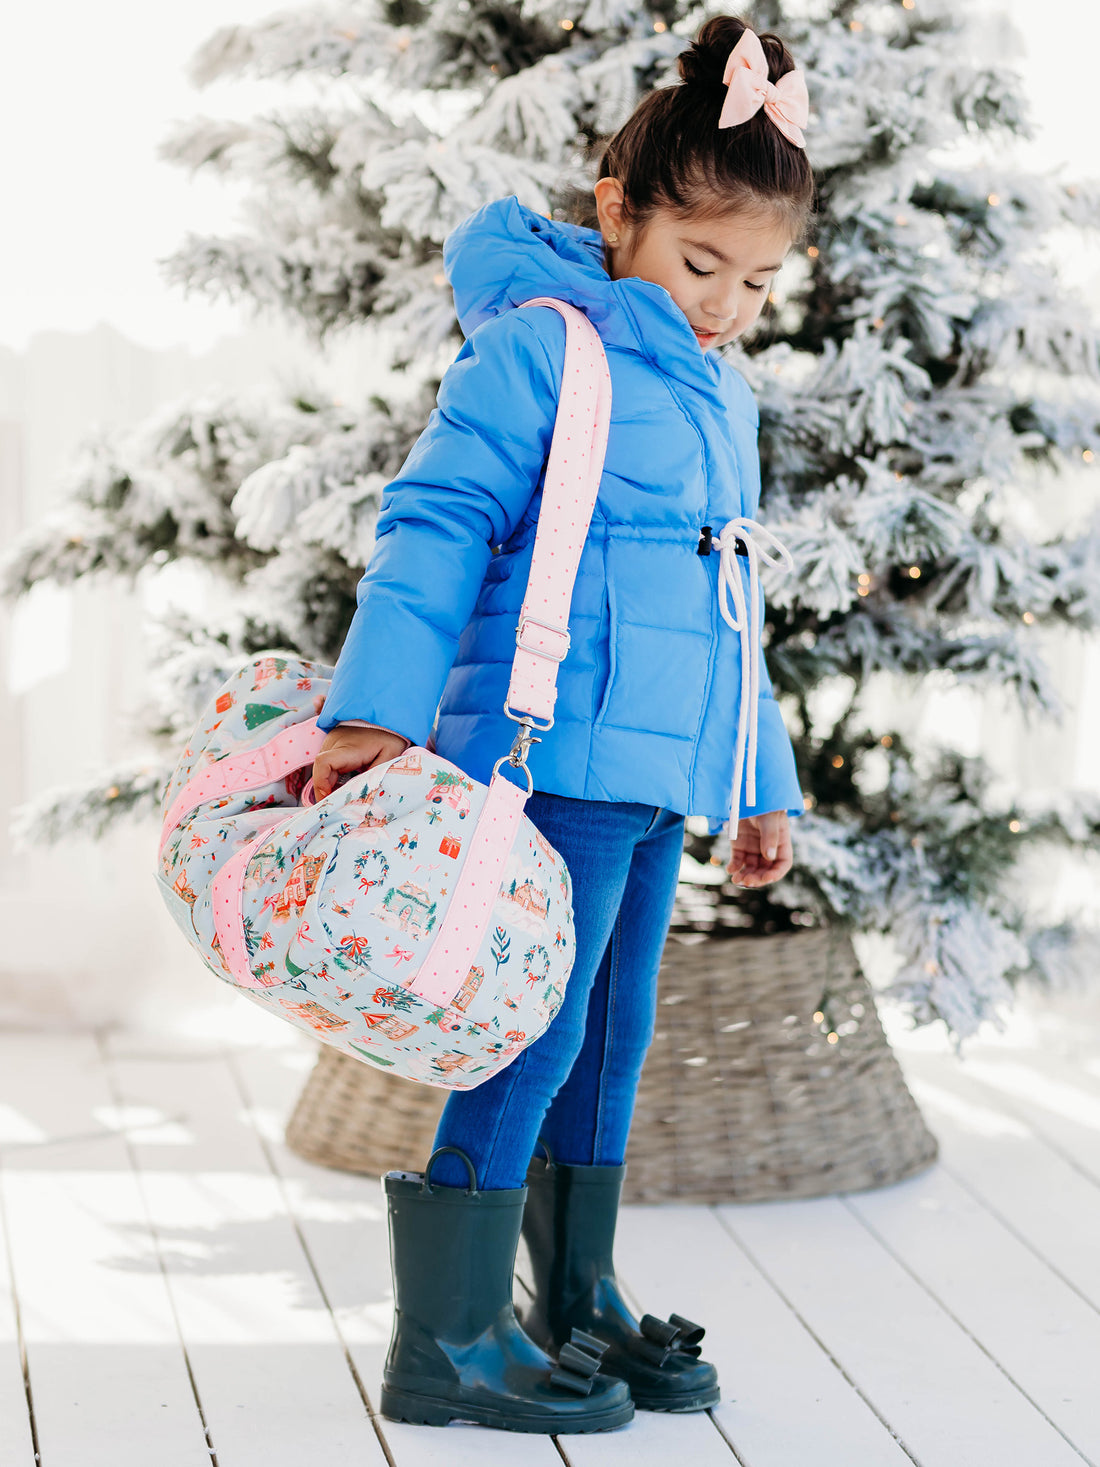 Little girl wearing our Puffer Jacket - Sapphire Blue & Cheery Rain Boot - Forest Green, while carrying our Everyday Duffle - Christmas Village